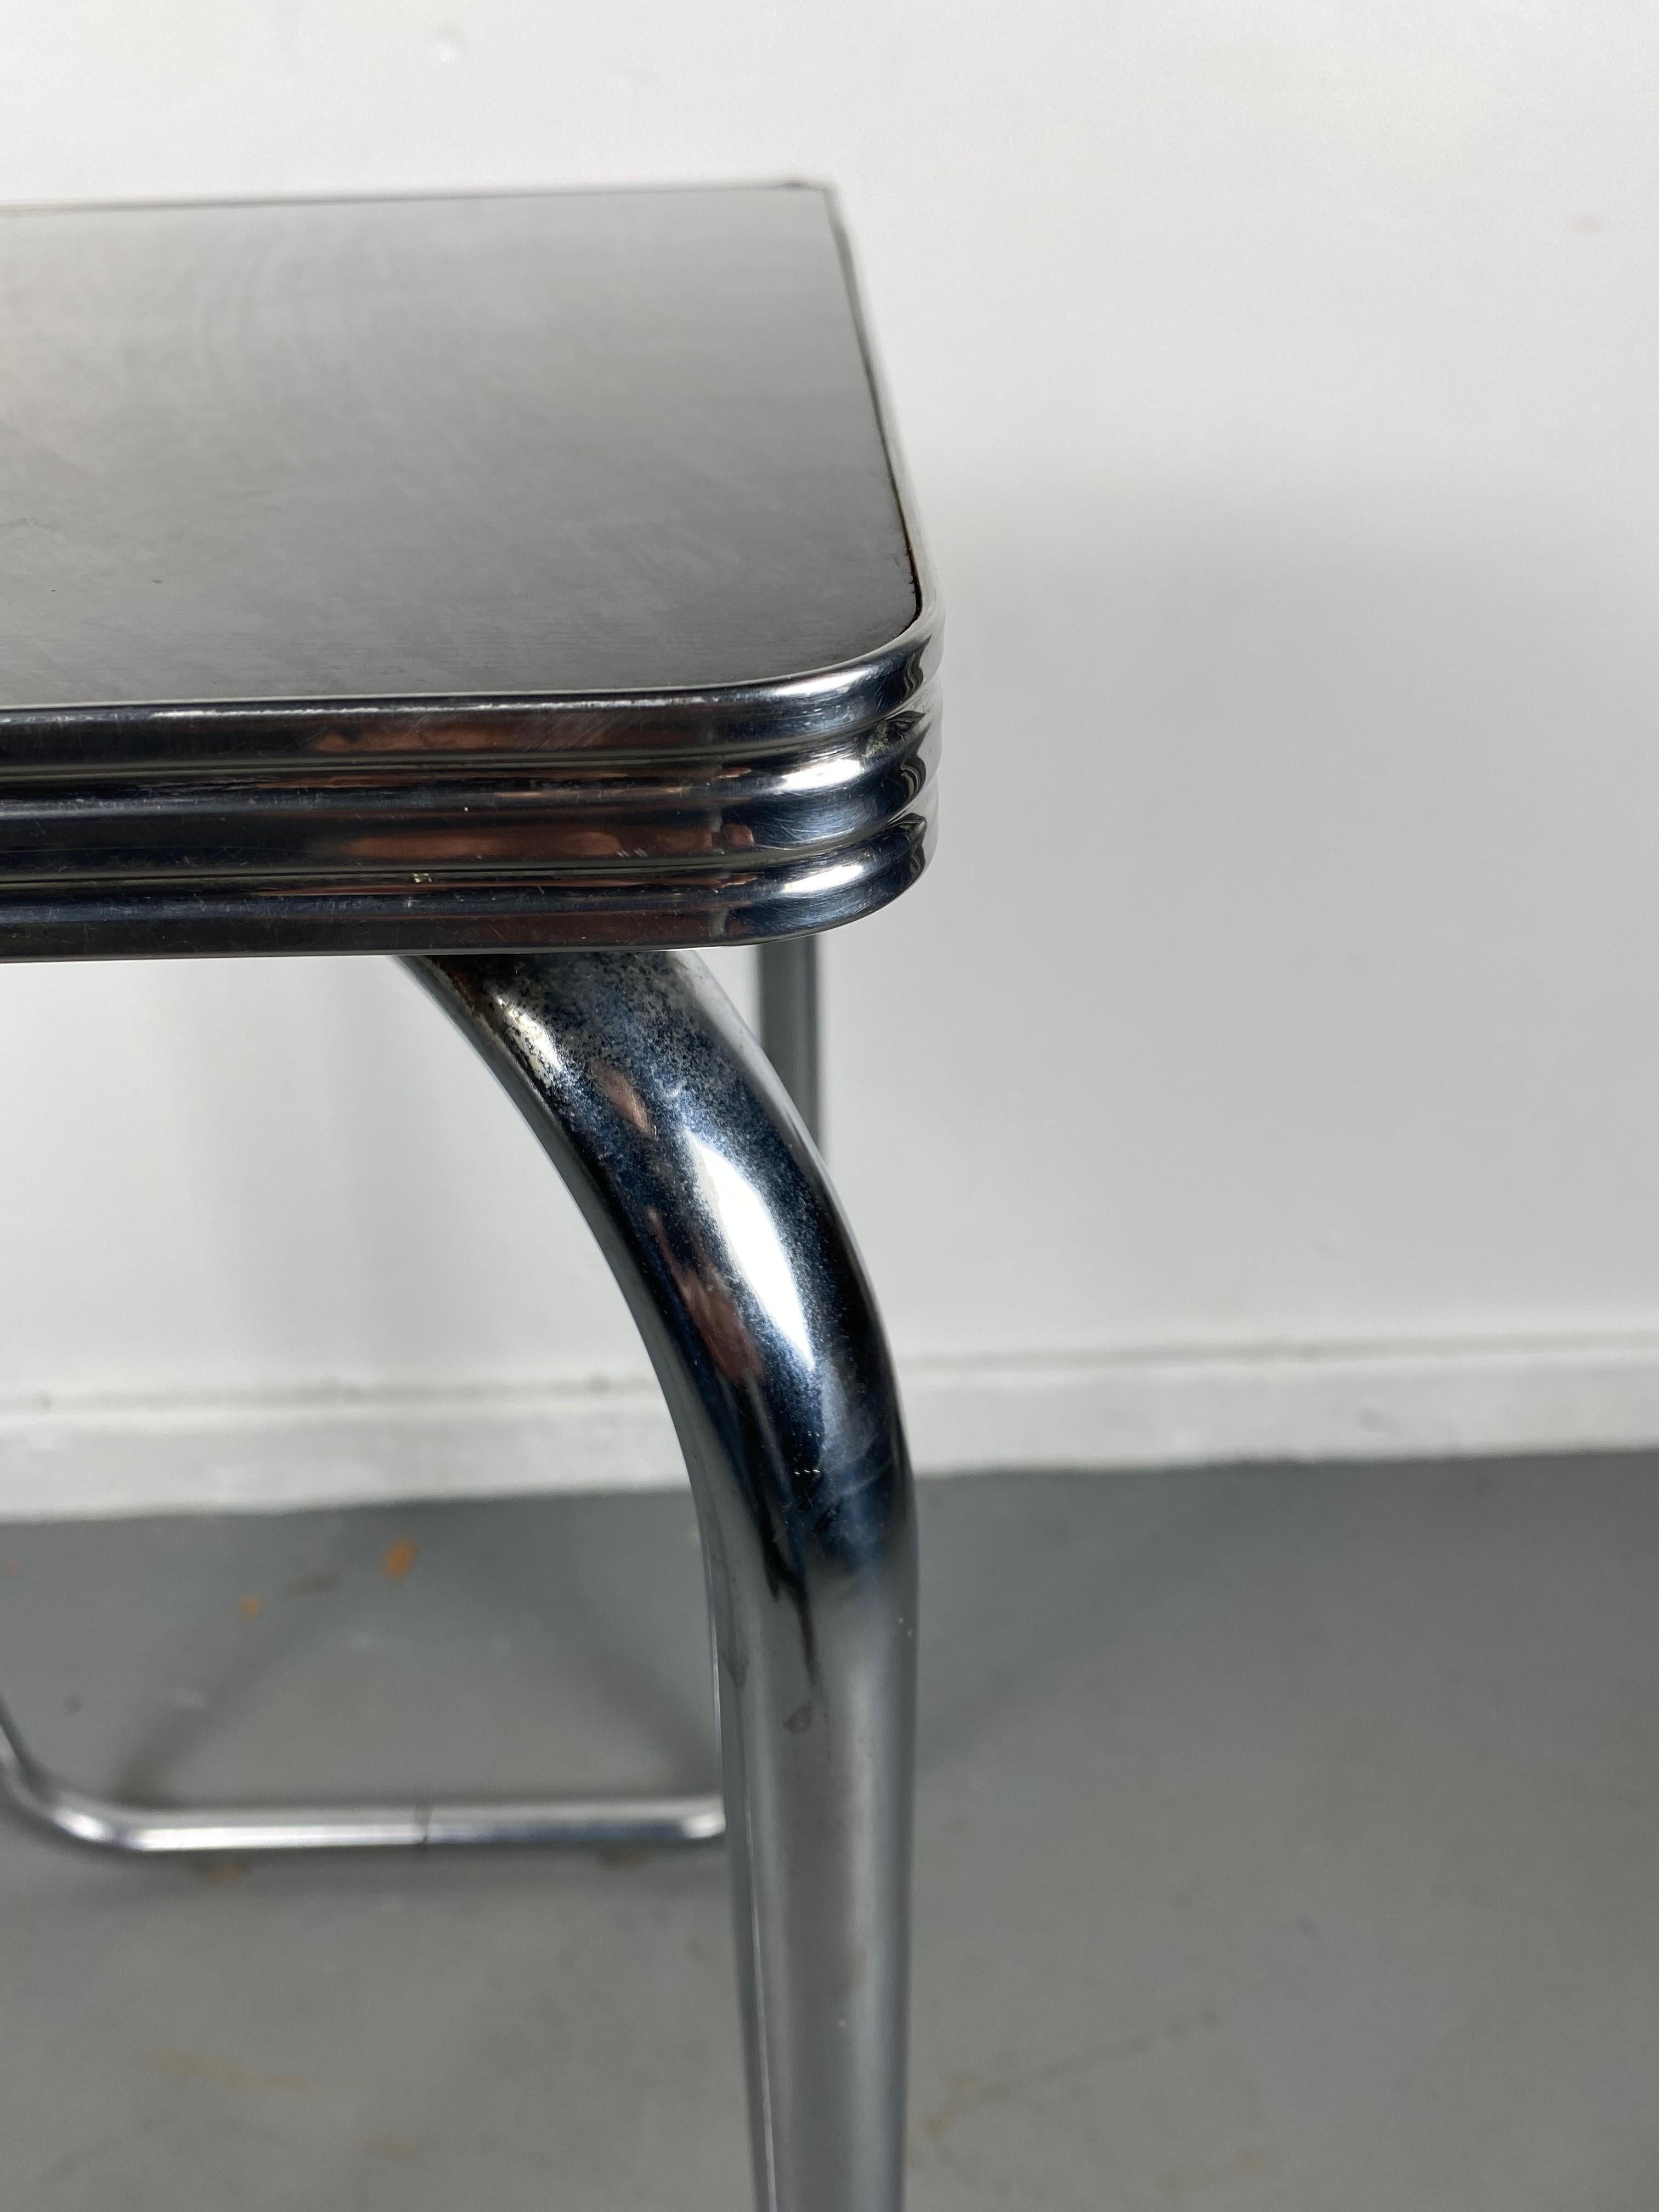 Unusual Bauhaus Style Black and Tubular Chrome Table / Stand / Wolfgang Hoffmann In Good Condition For Sale In Buffalo, NY